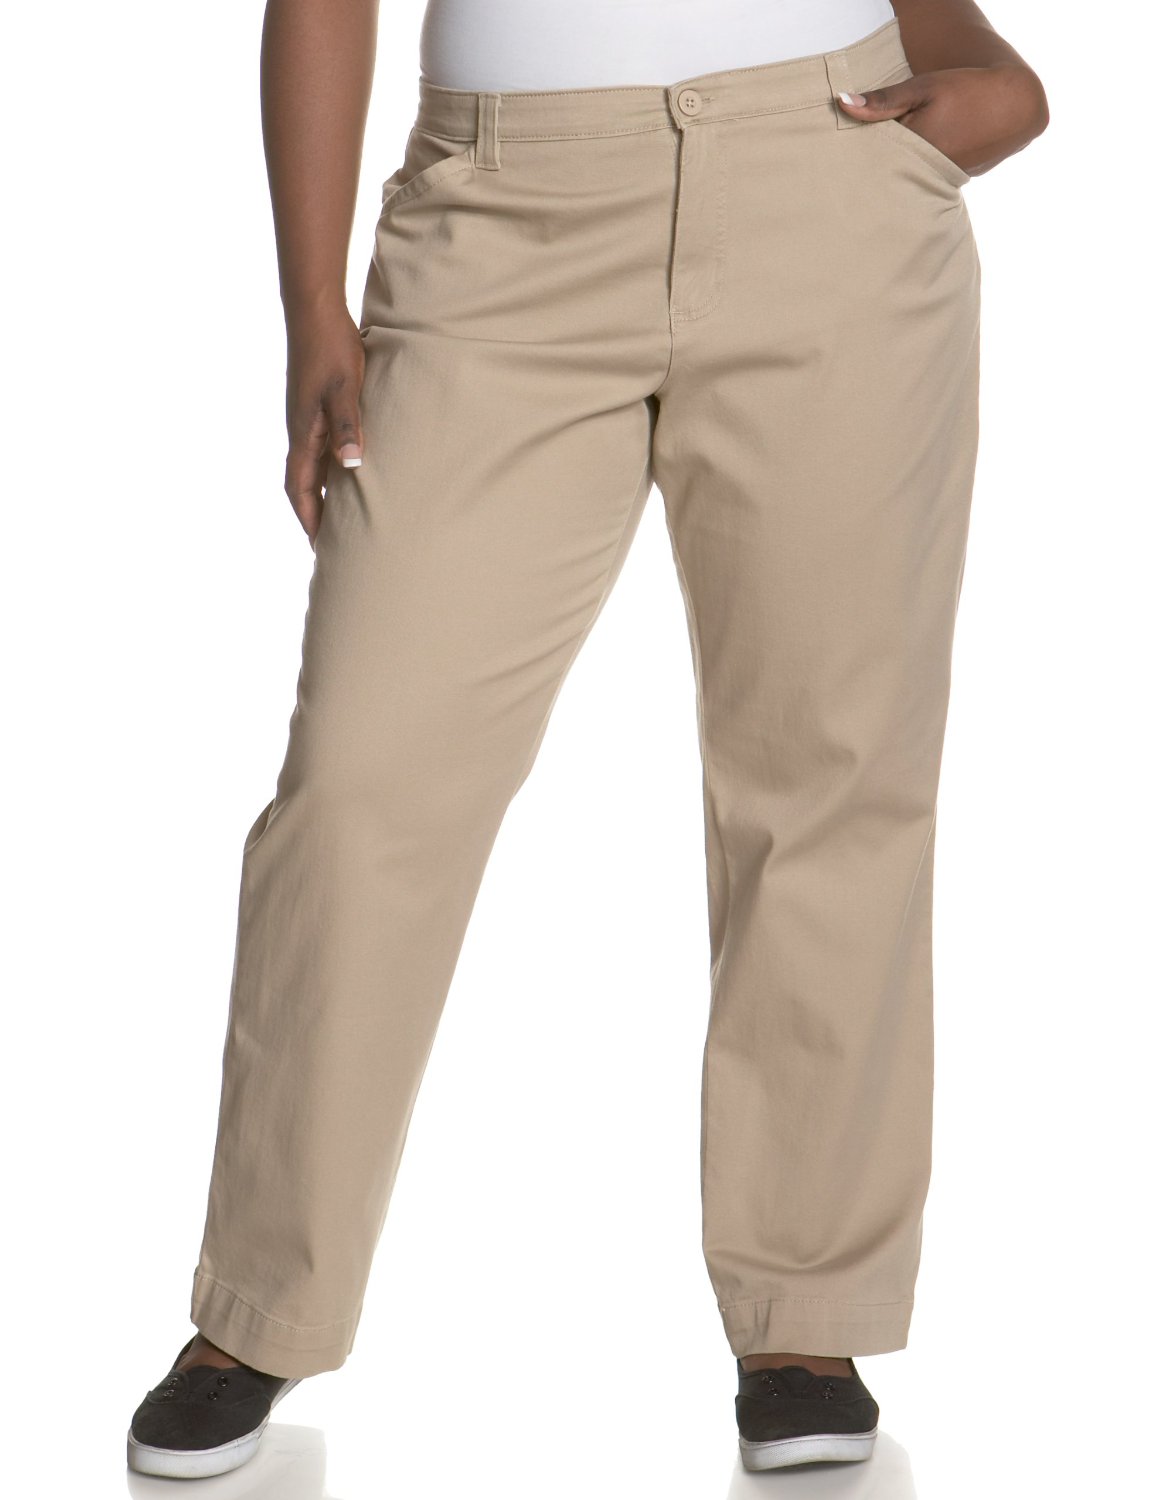 Best plus size khaki pants from top selling brands | All About Cute ...